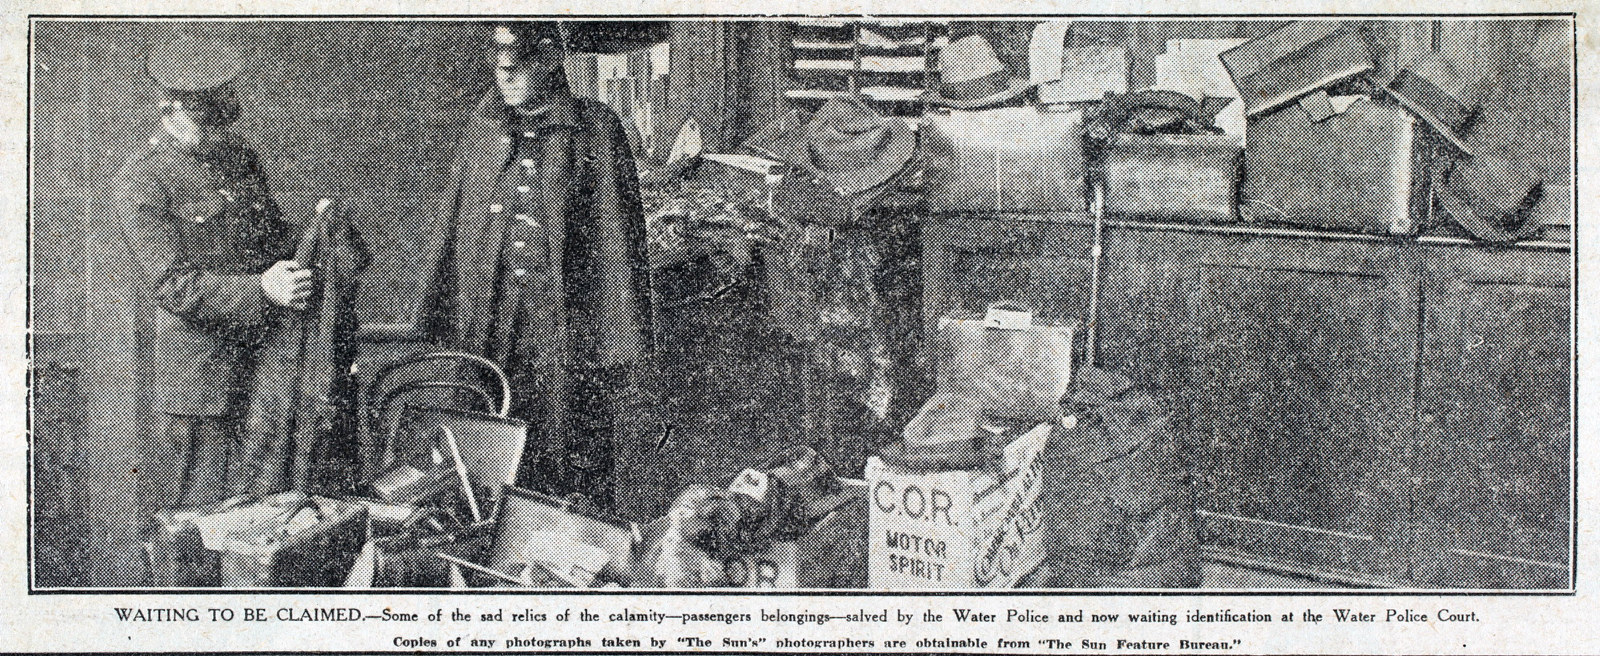 Newspaper clipping of photograph of police with belongings.